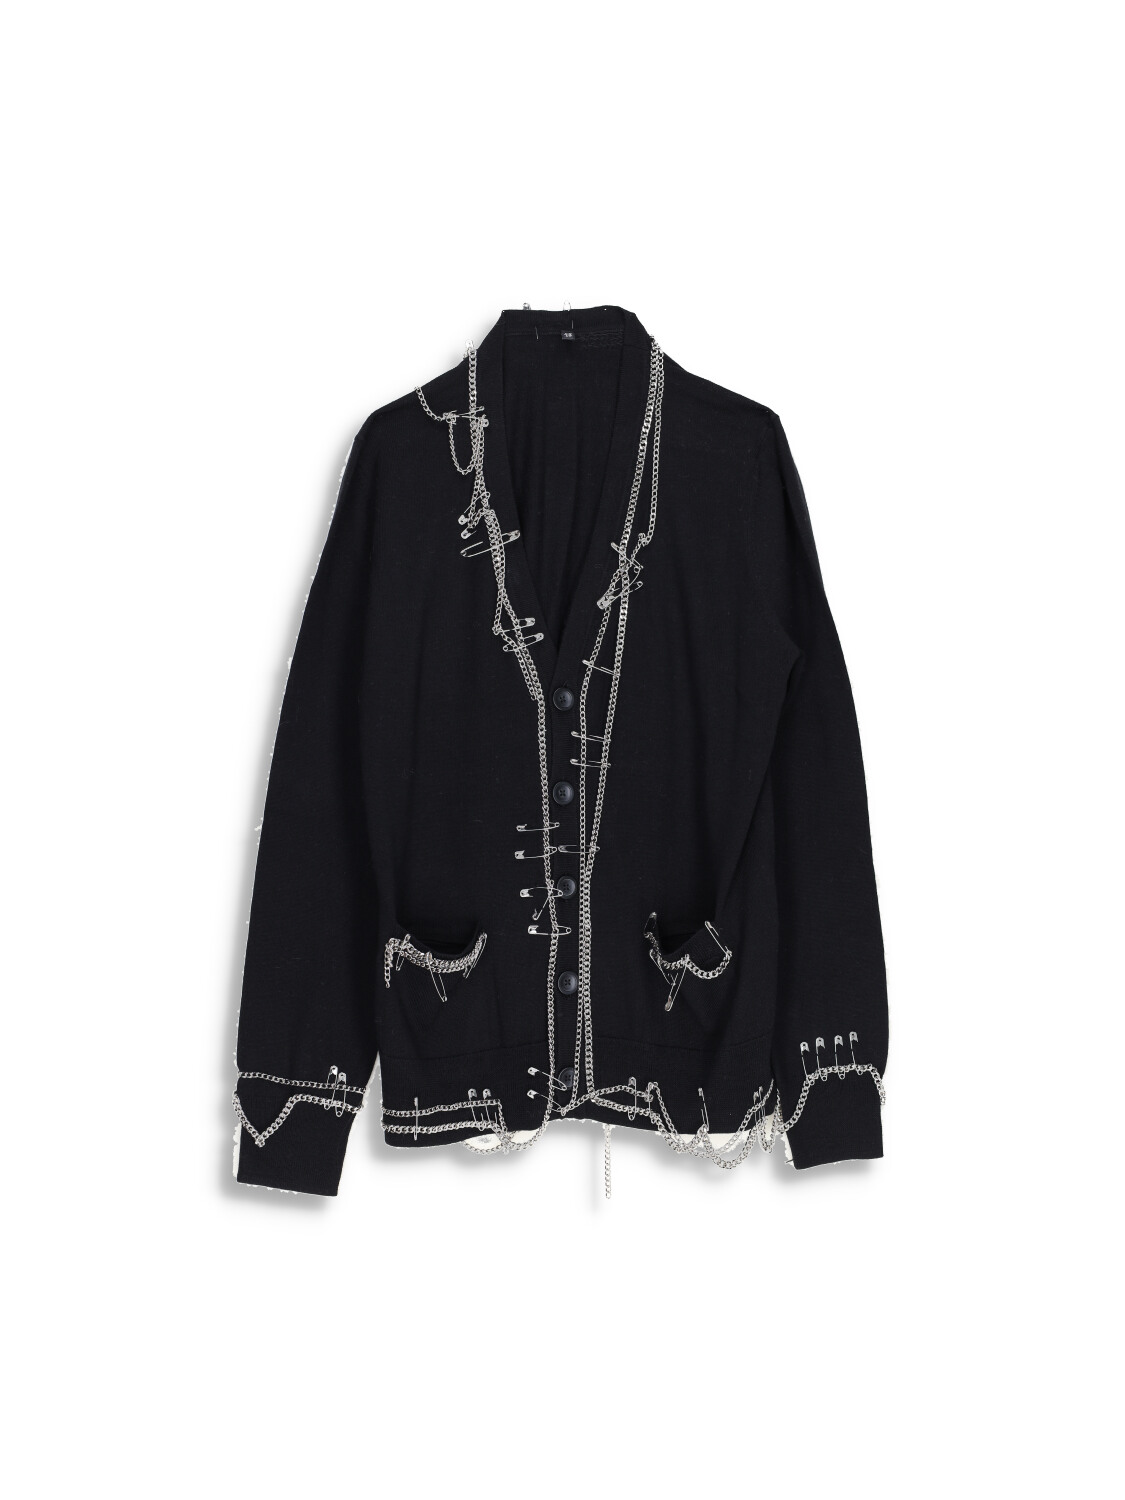 Cardigan with chain detailing - Black cardigan with chain details 